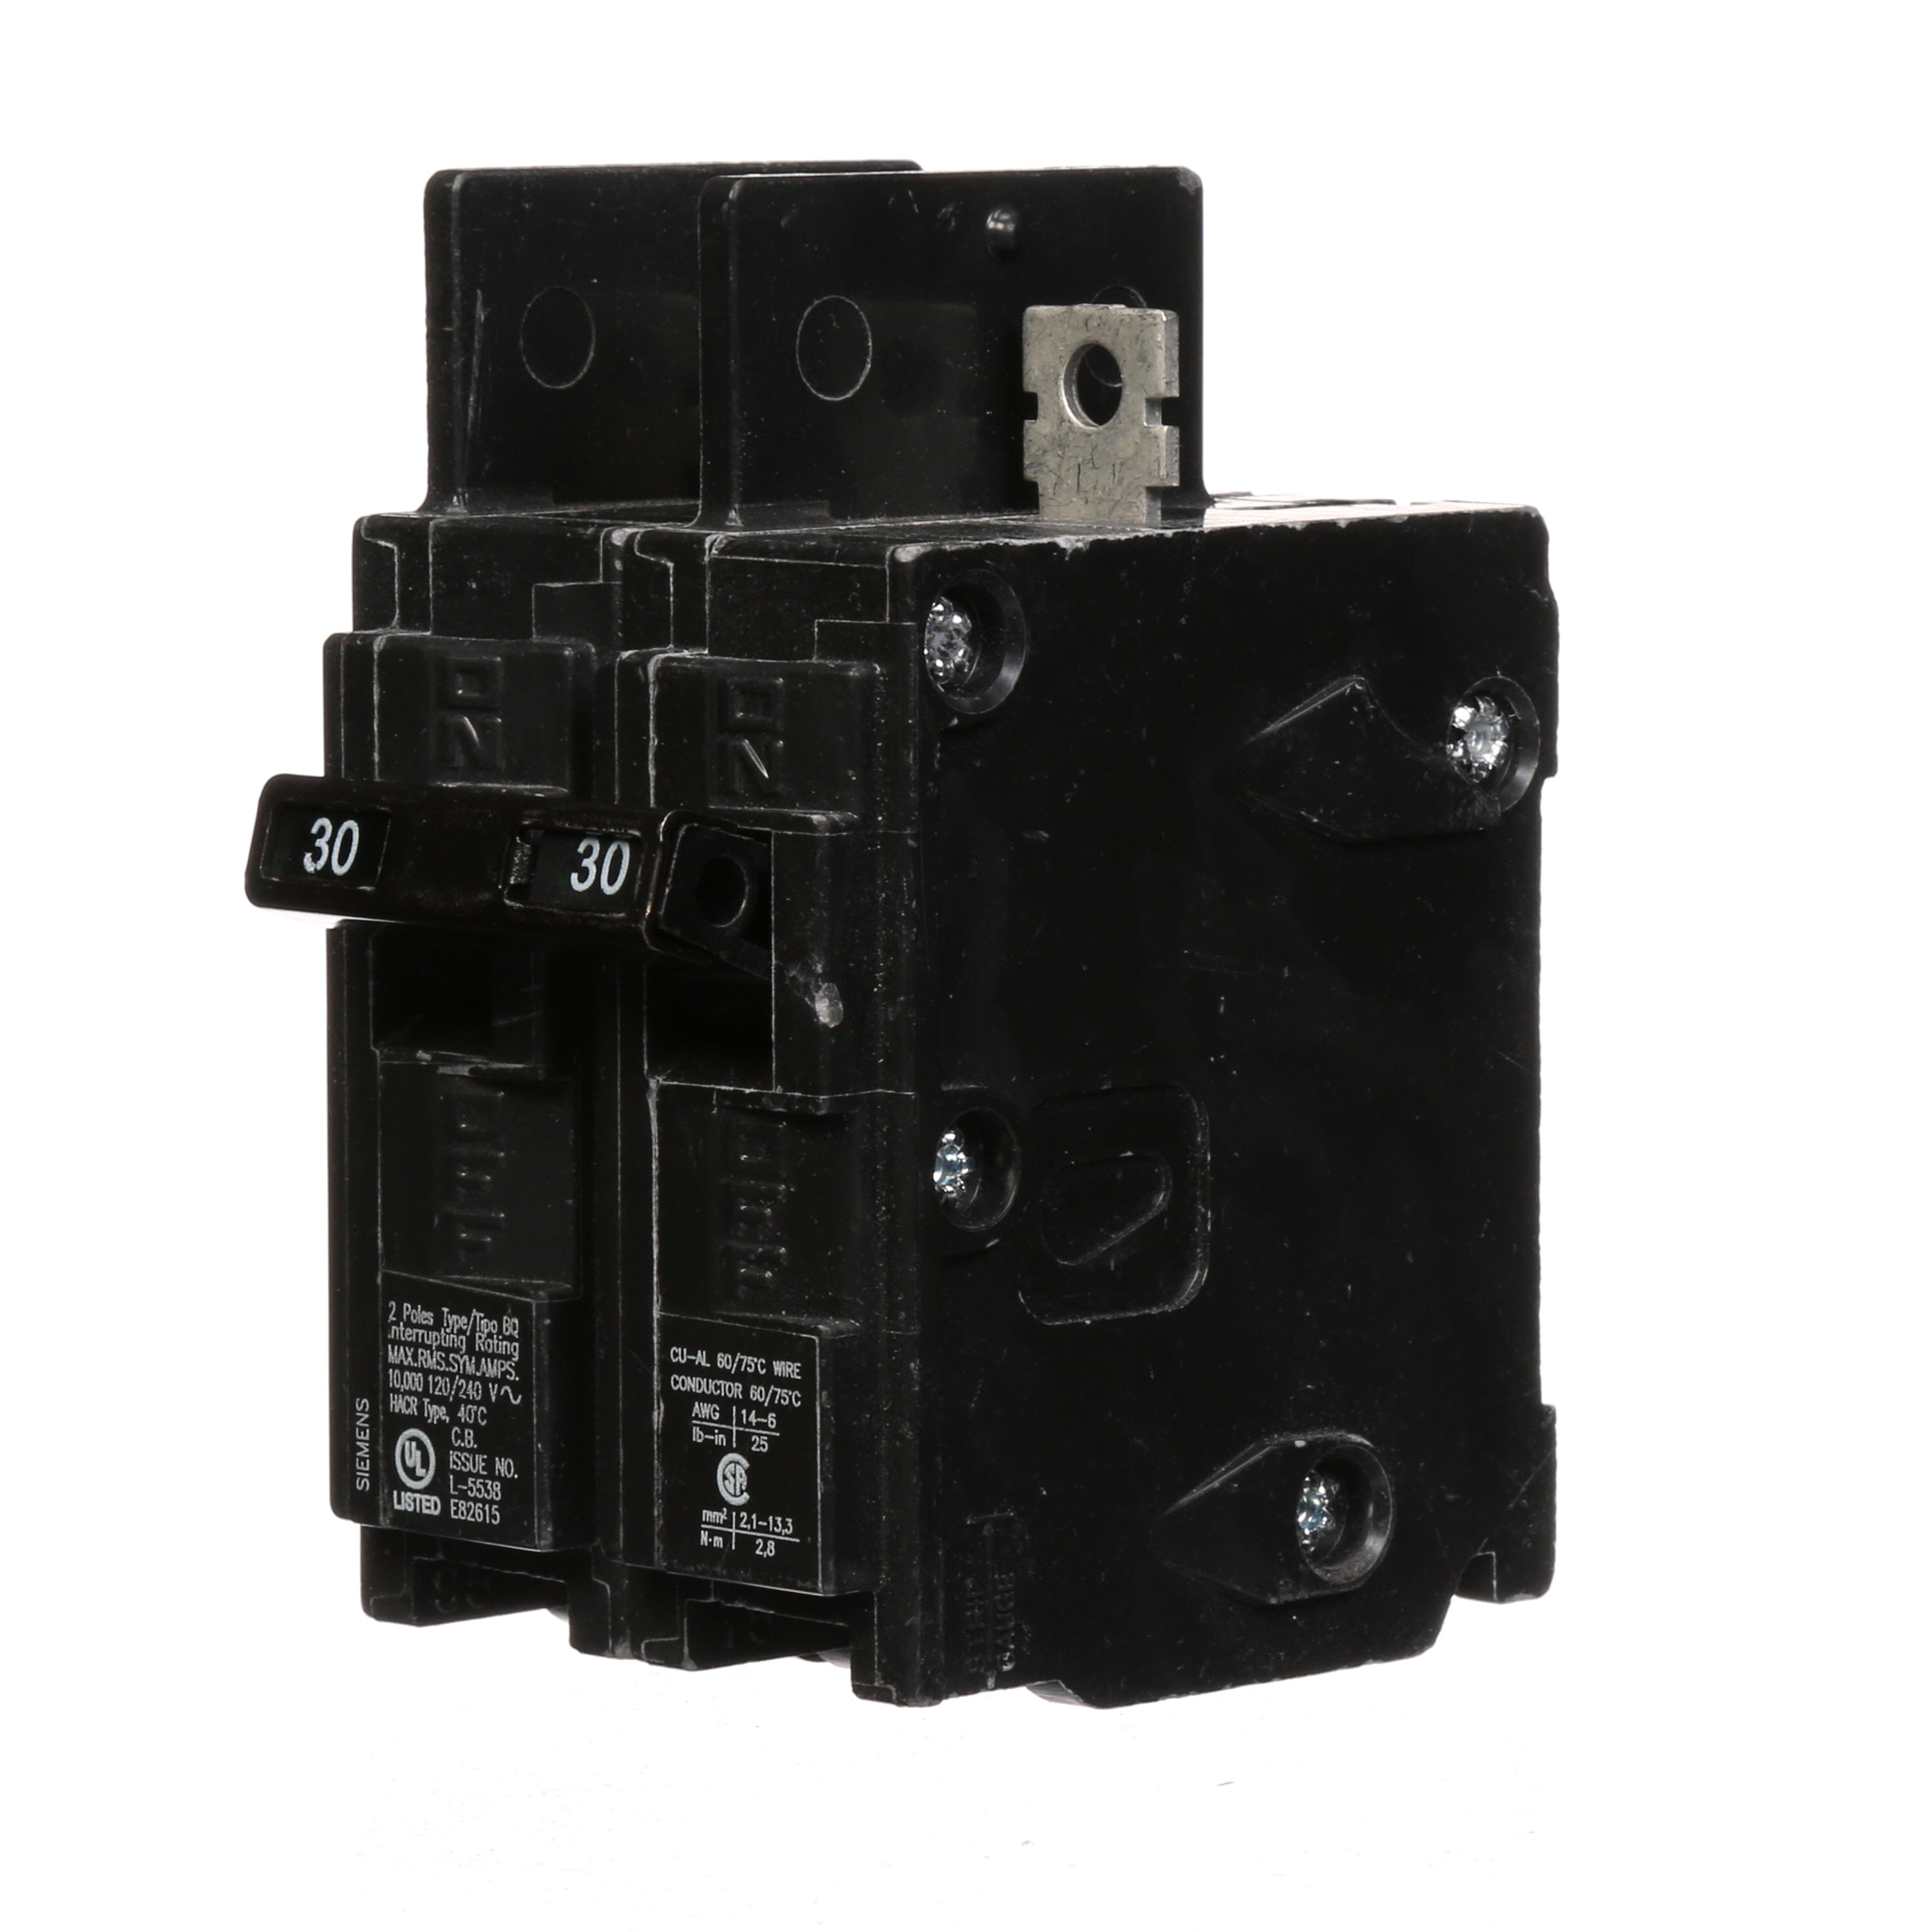 Siemens Low Voltage Molded Case Circuit Breakers General Purpose MCCBs - Type BQ, 2-Pole, 120/240VAC are Circuit Protection Molded Case Circuit Breakers. 2-Pole Common-Trip circuit breaker type BQ. Rated 120/240V (030A) (AIR 10 kA). Special features Load side lugs are included.